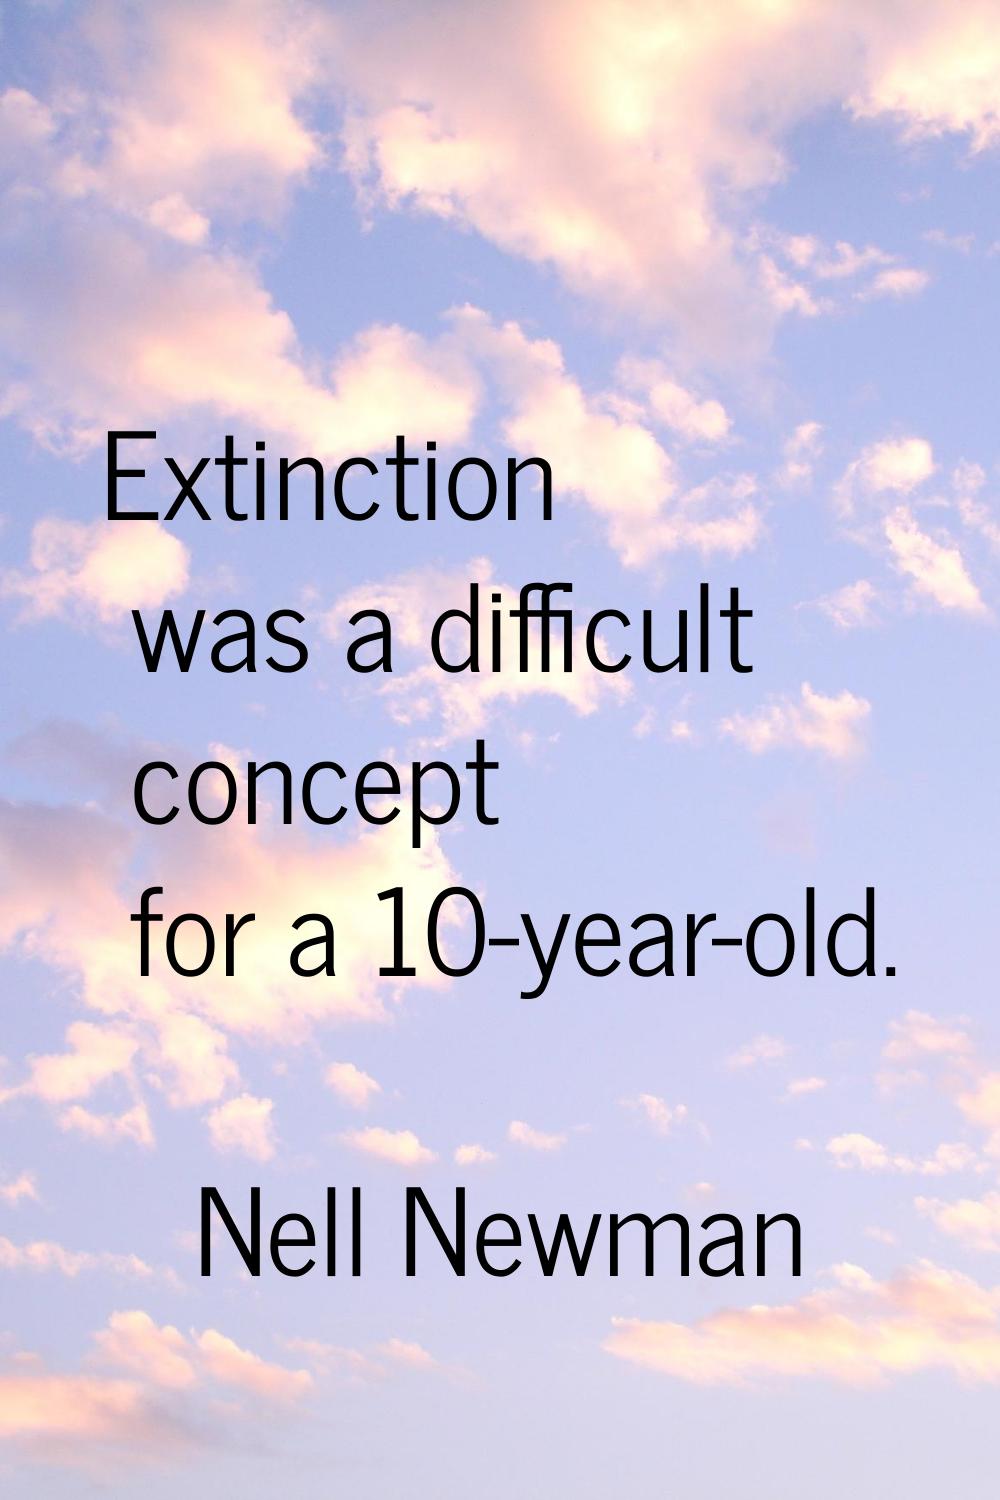 Extinction was a difficult concept for a 10-year-old.